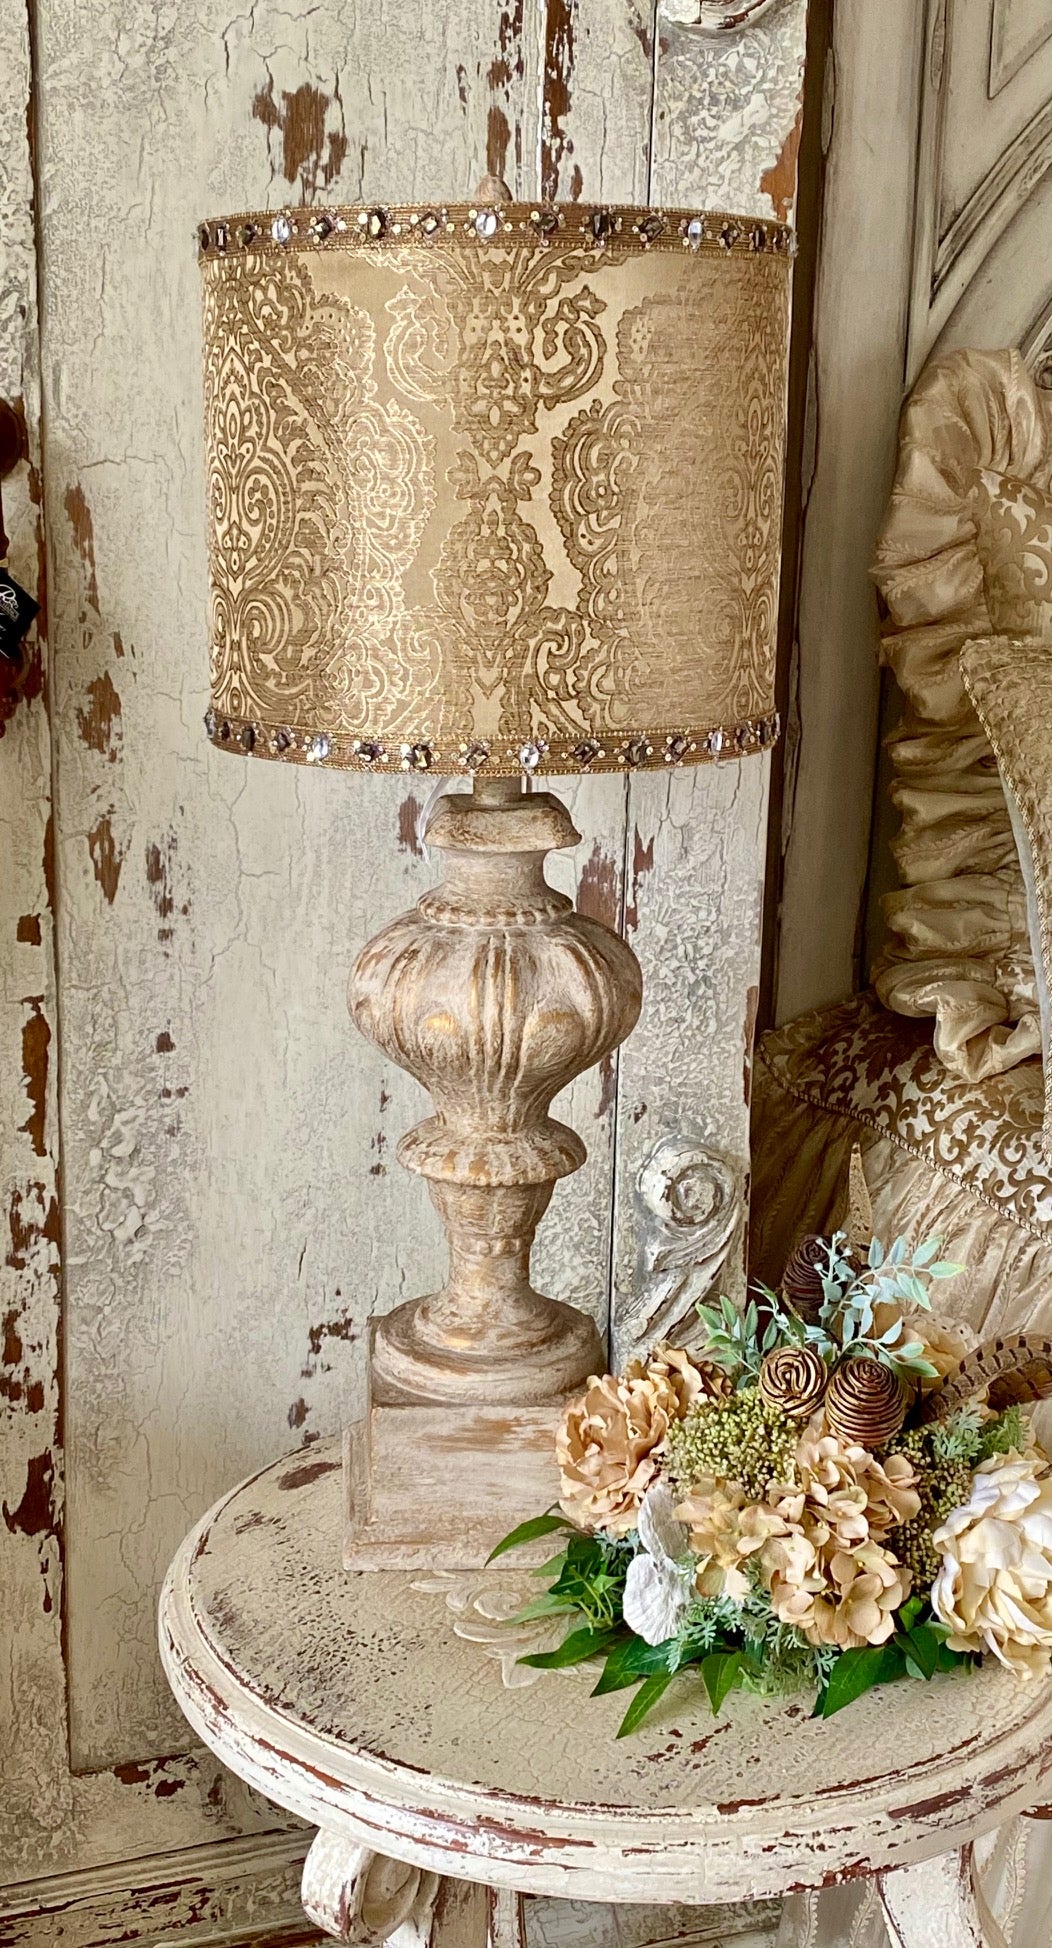 Gallery Designs Table Lamp in Cream and Gold Finish